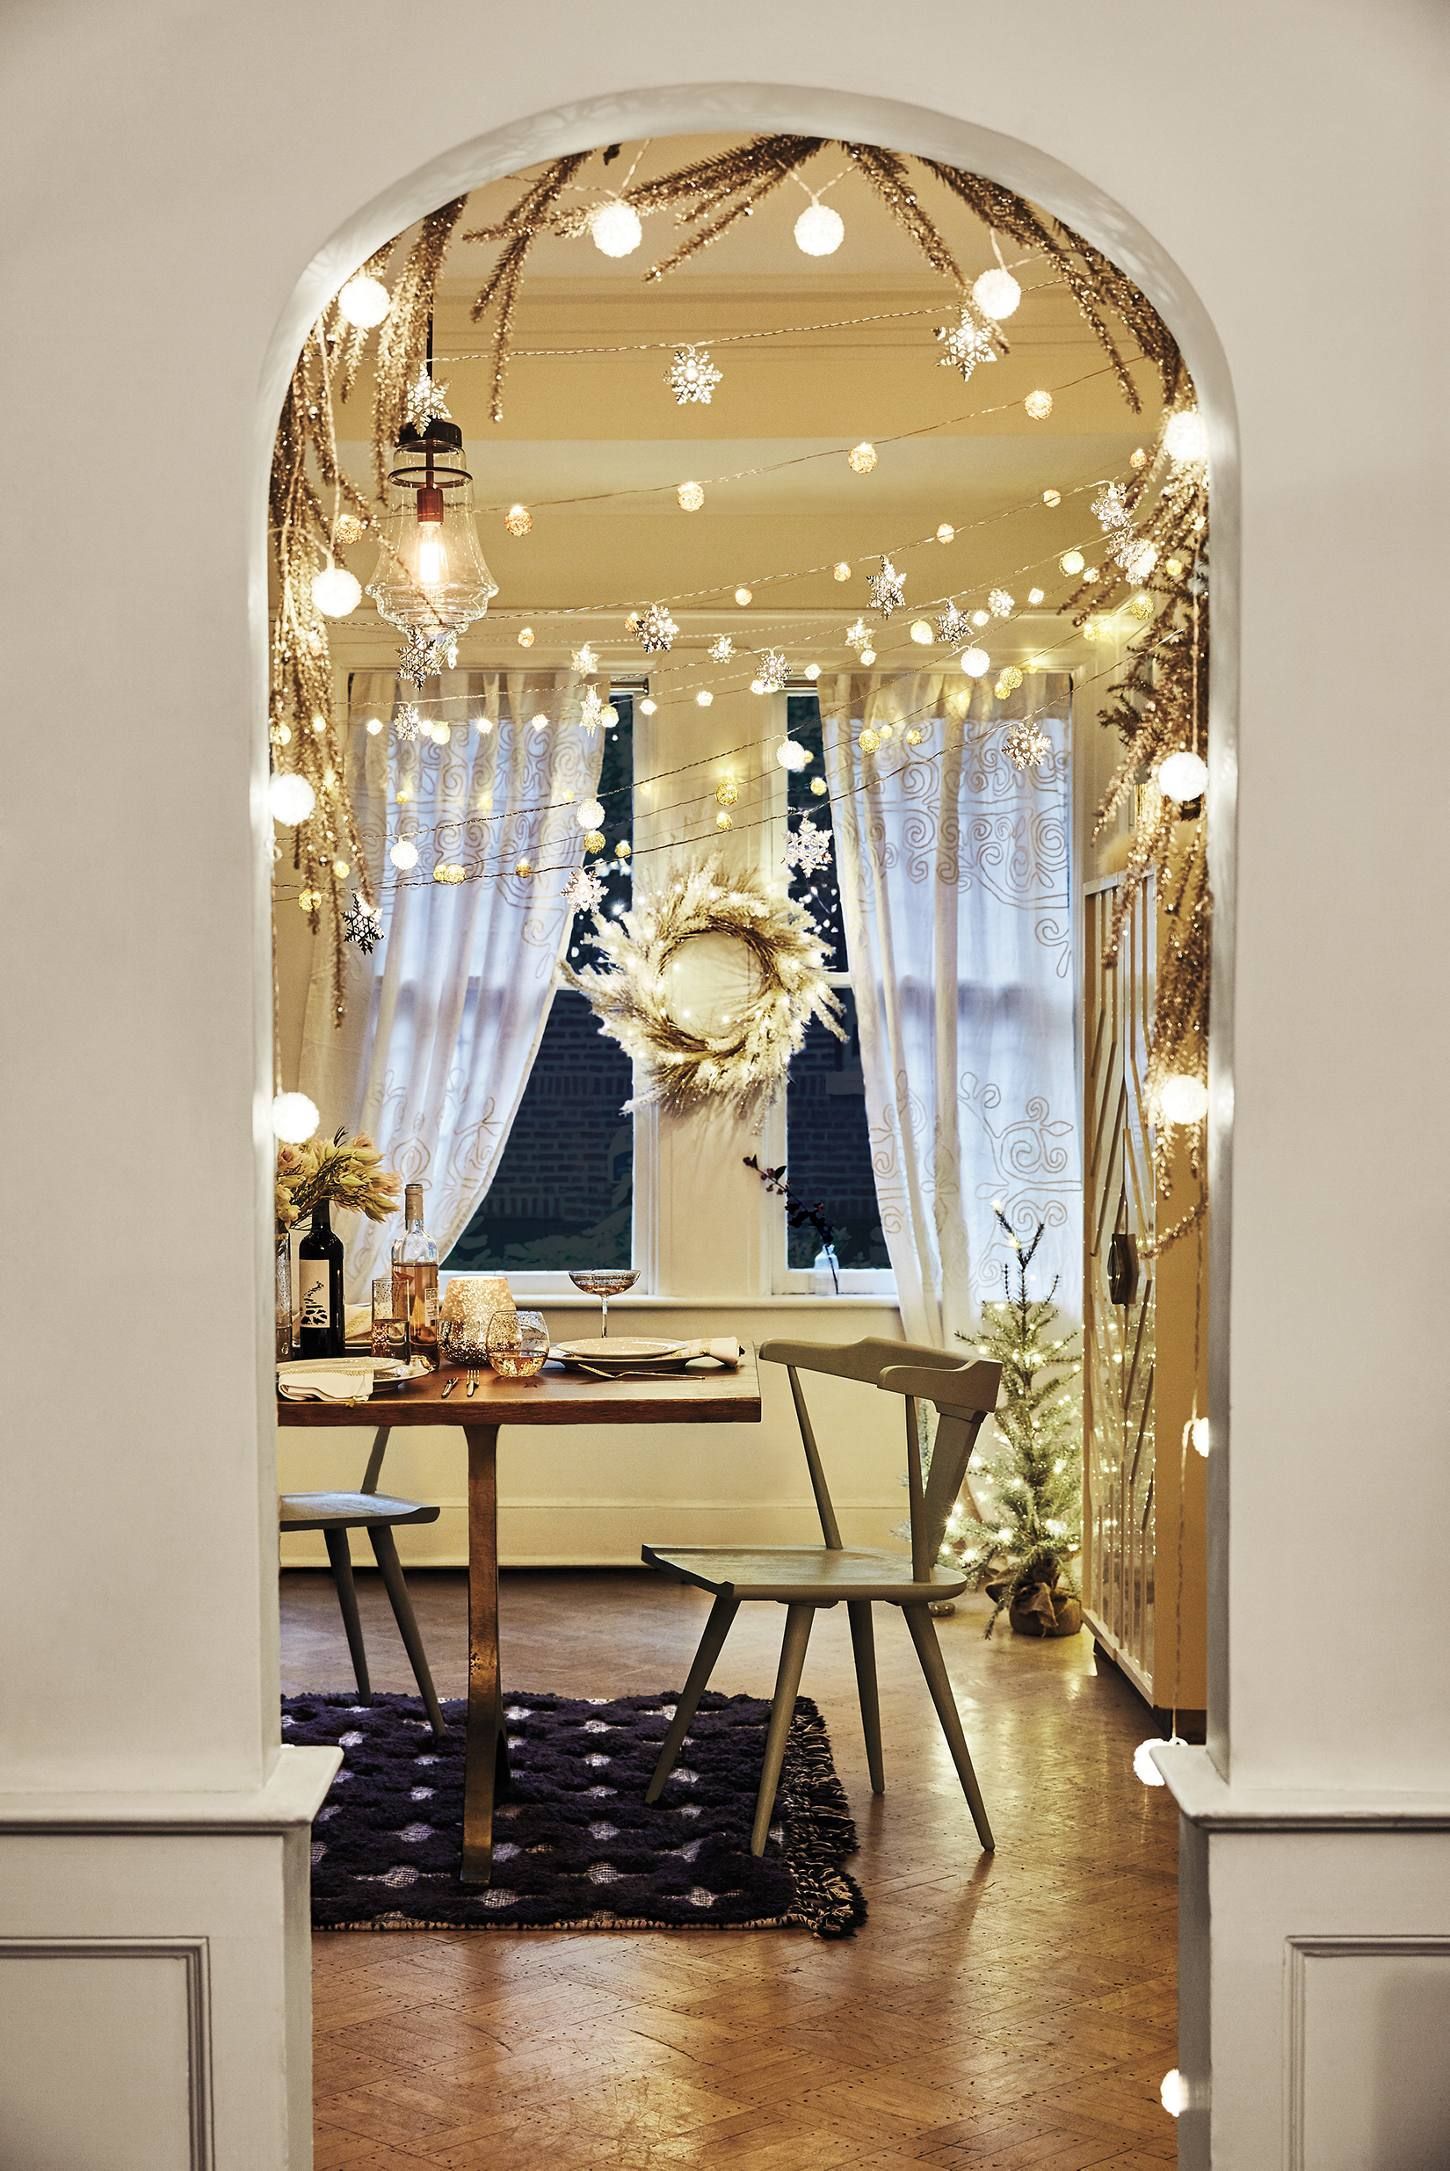 Nemus Dining Table -   20 holiday Style string lights
 ideas